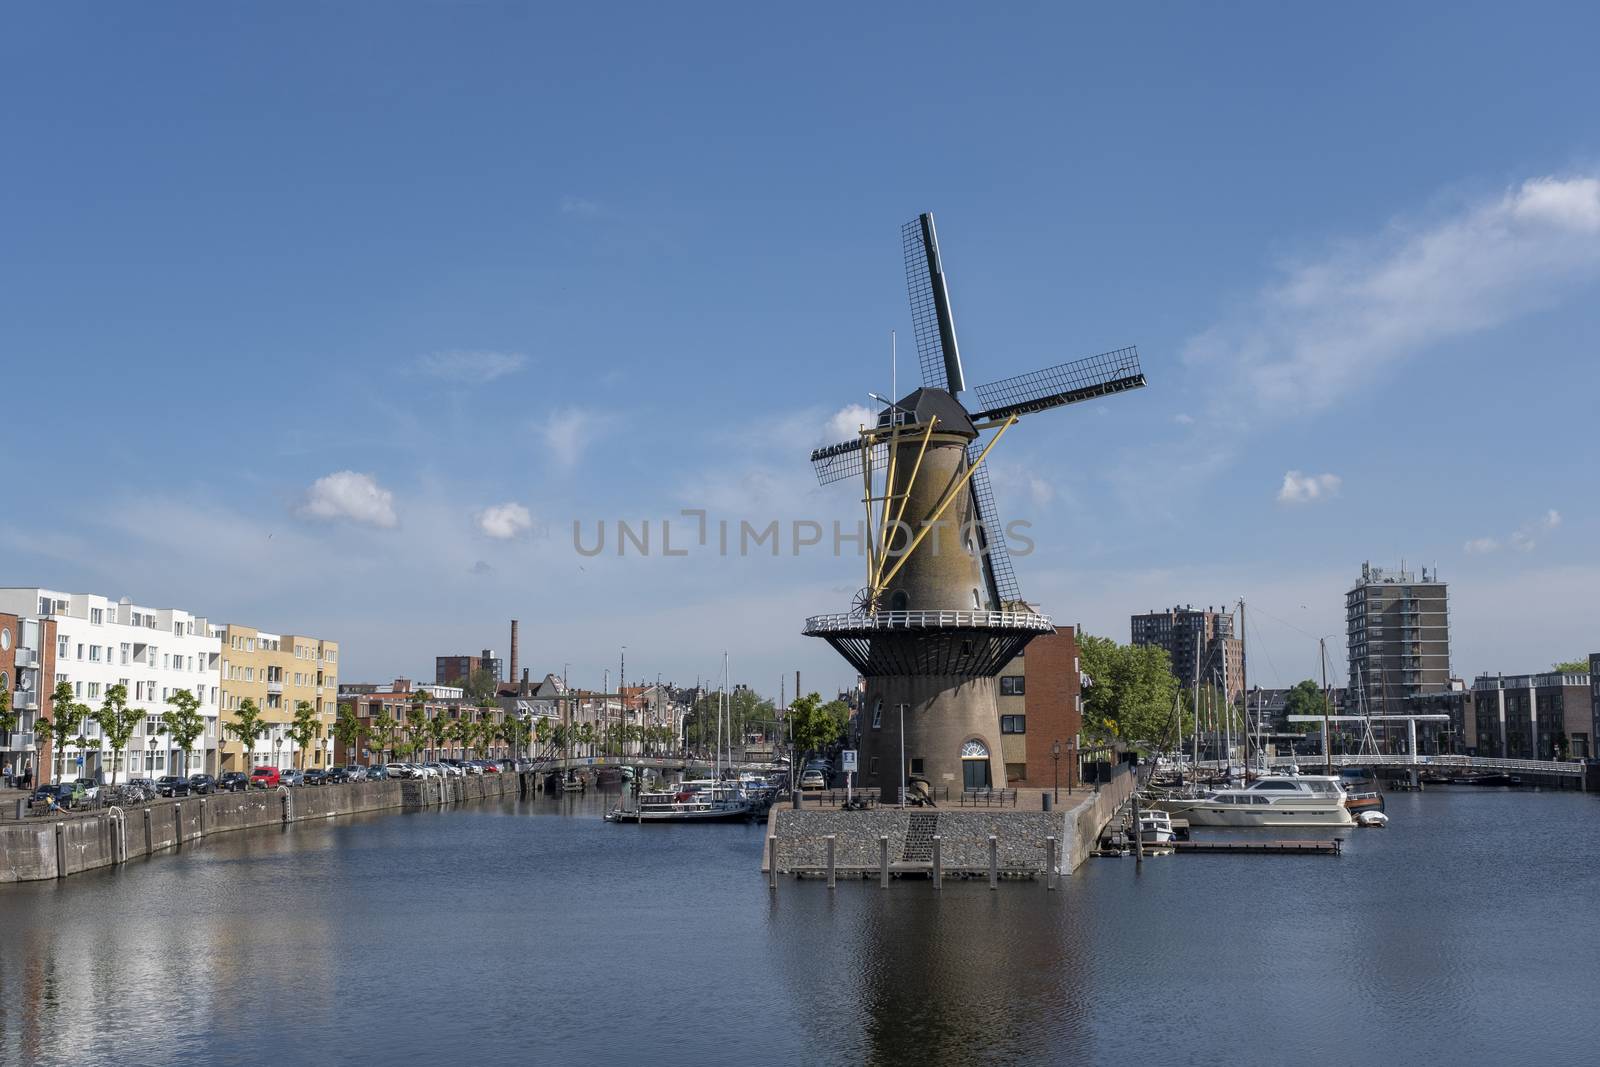 The historic Delfshaven district with a windmill in Rotterdam, The Netherlands. South Holland region. Summer sunny day